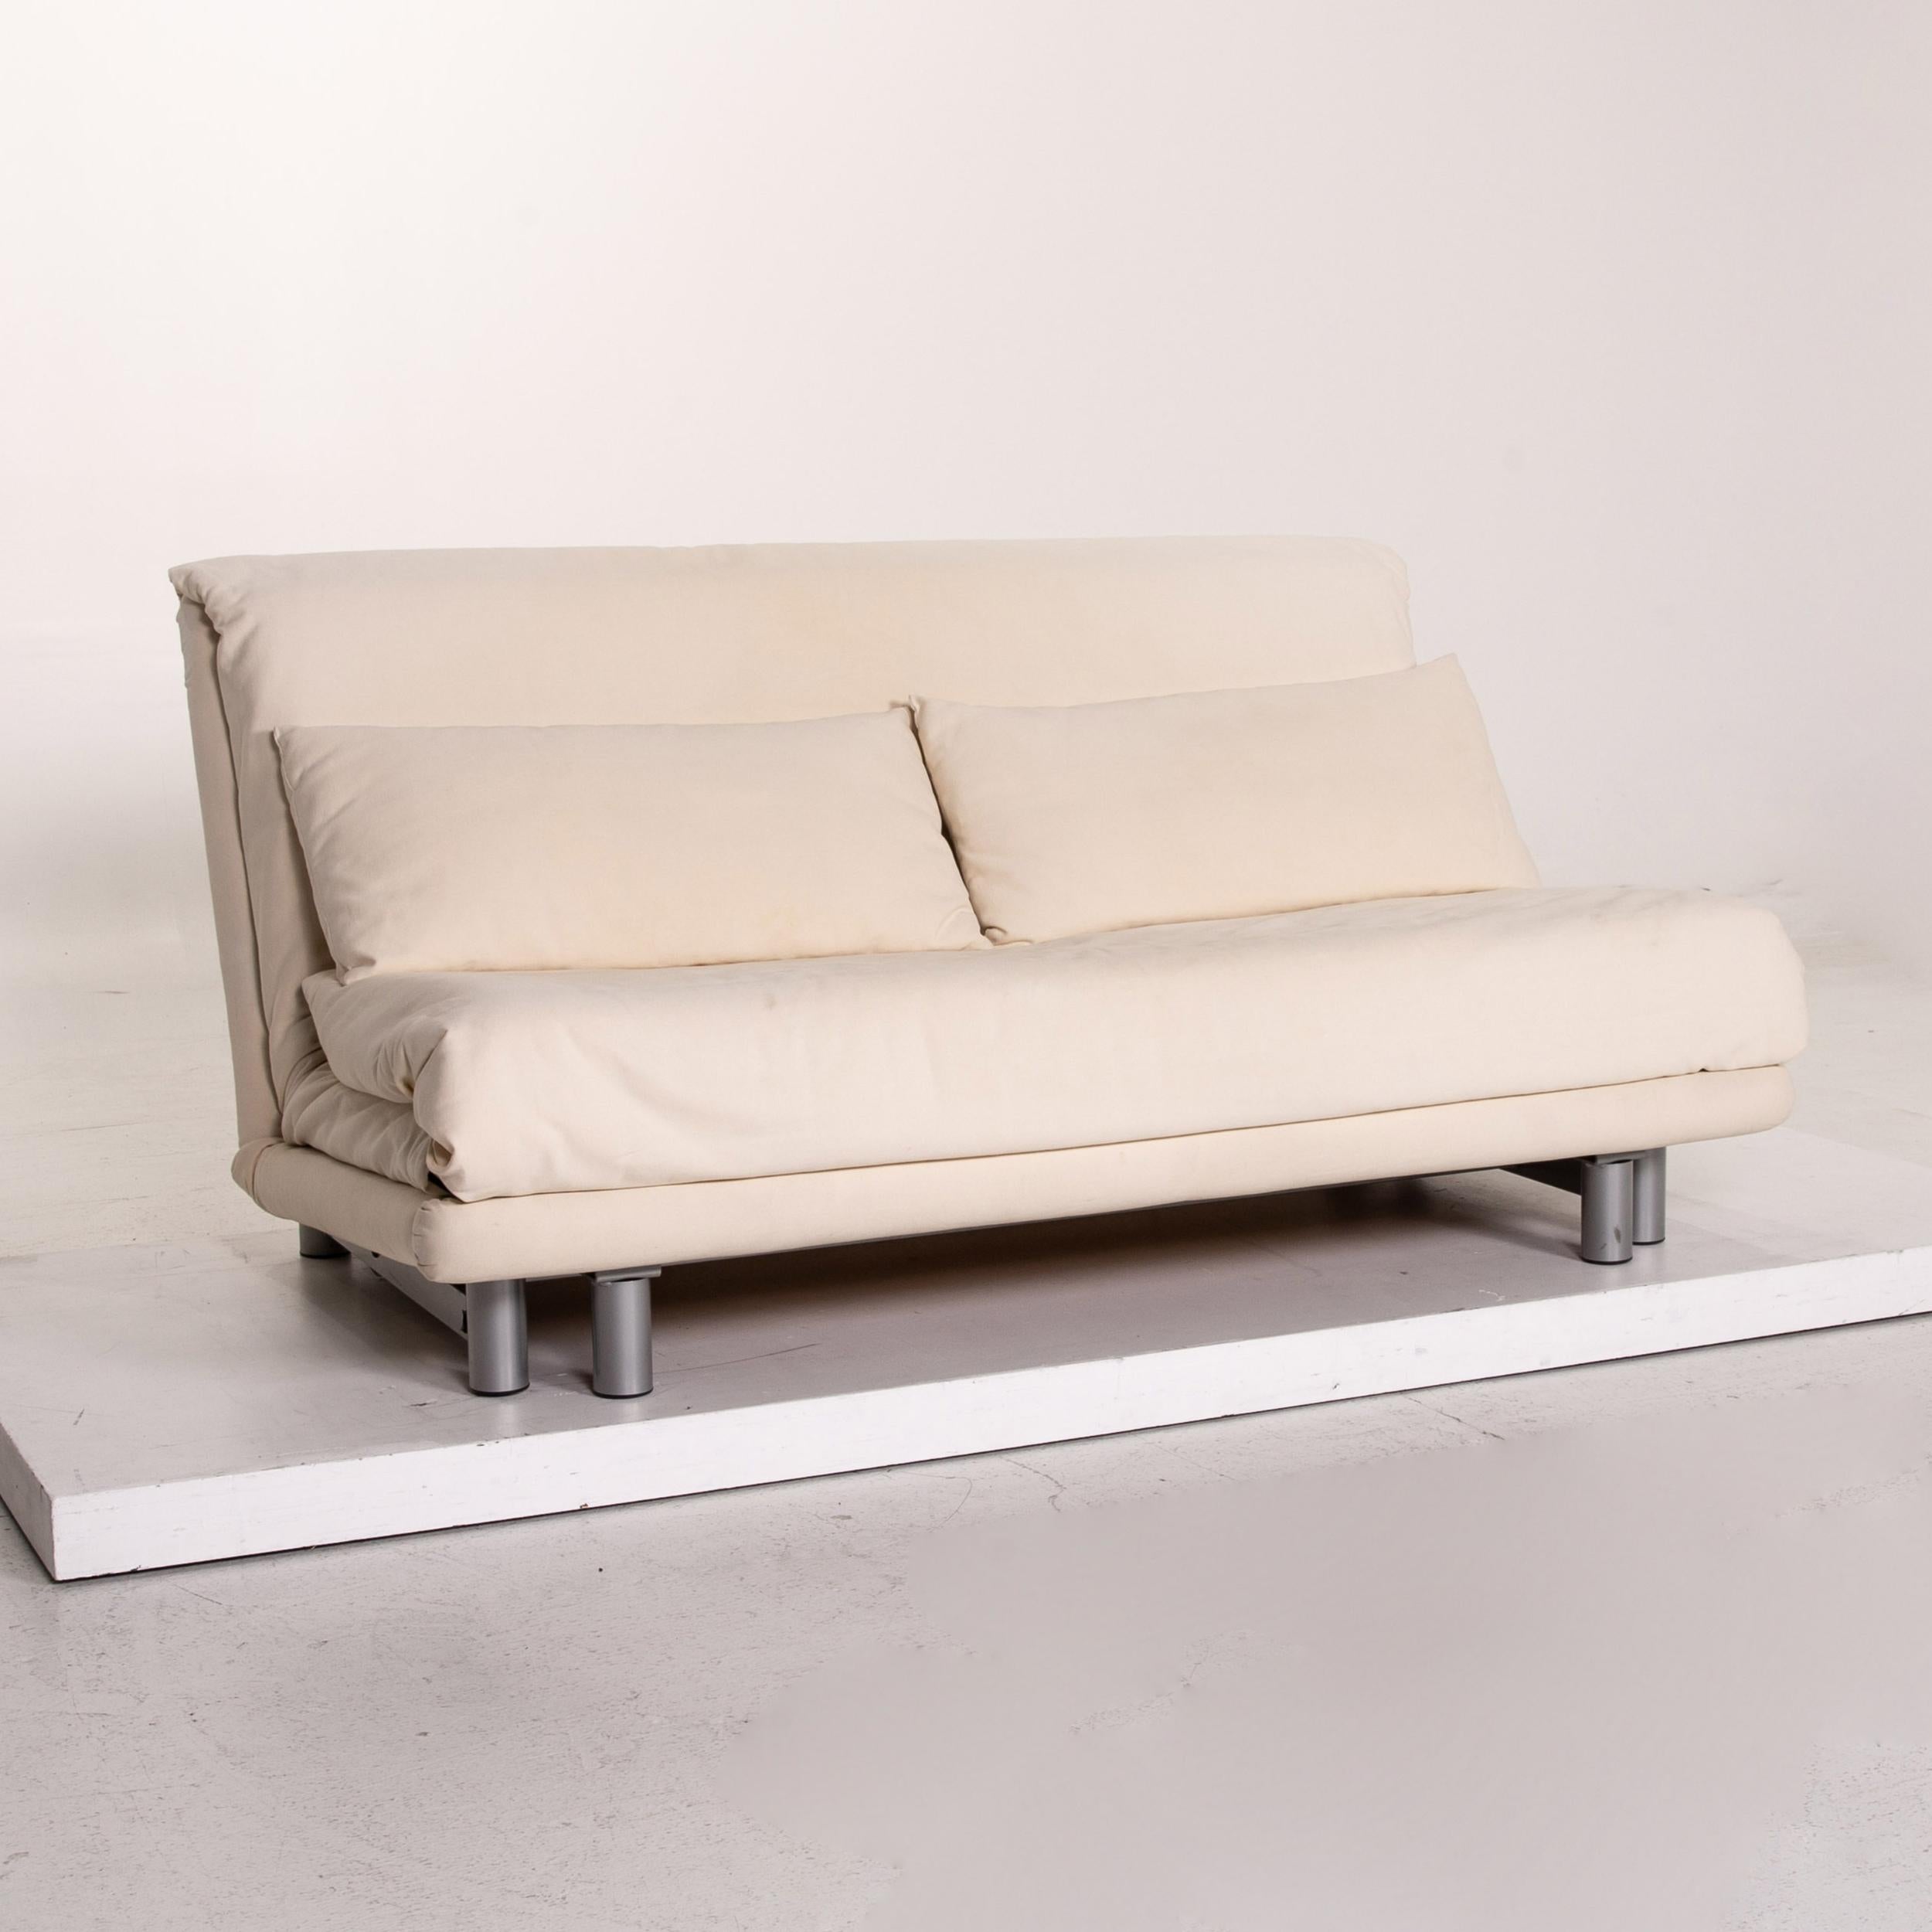 Ligne Roset Fabric Sofa Bed Cream Two-Seat Function Sleeping Function Couch For Sale 2